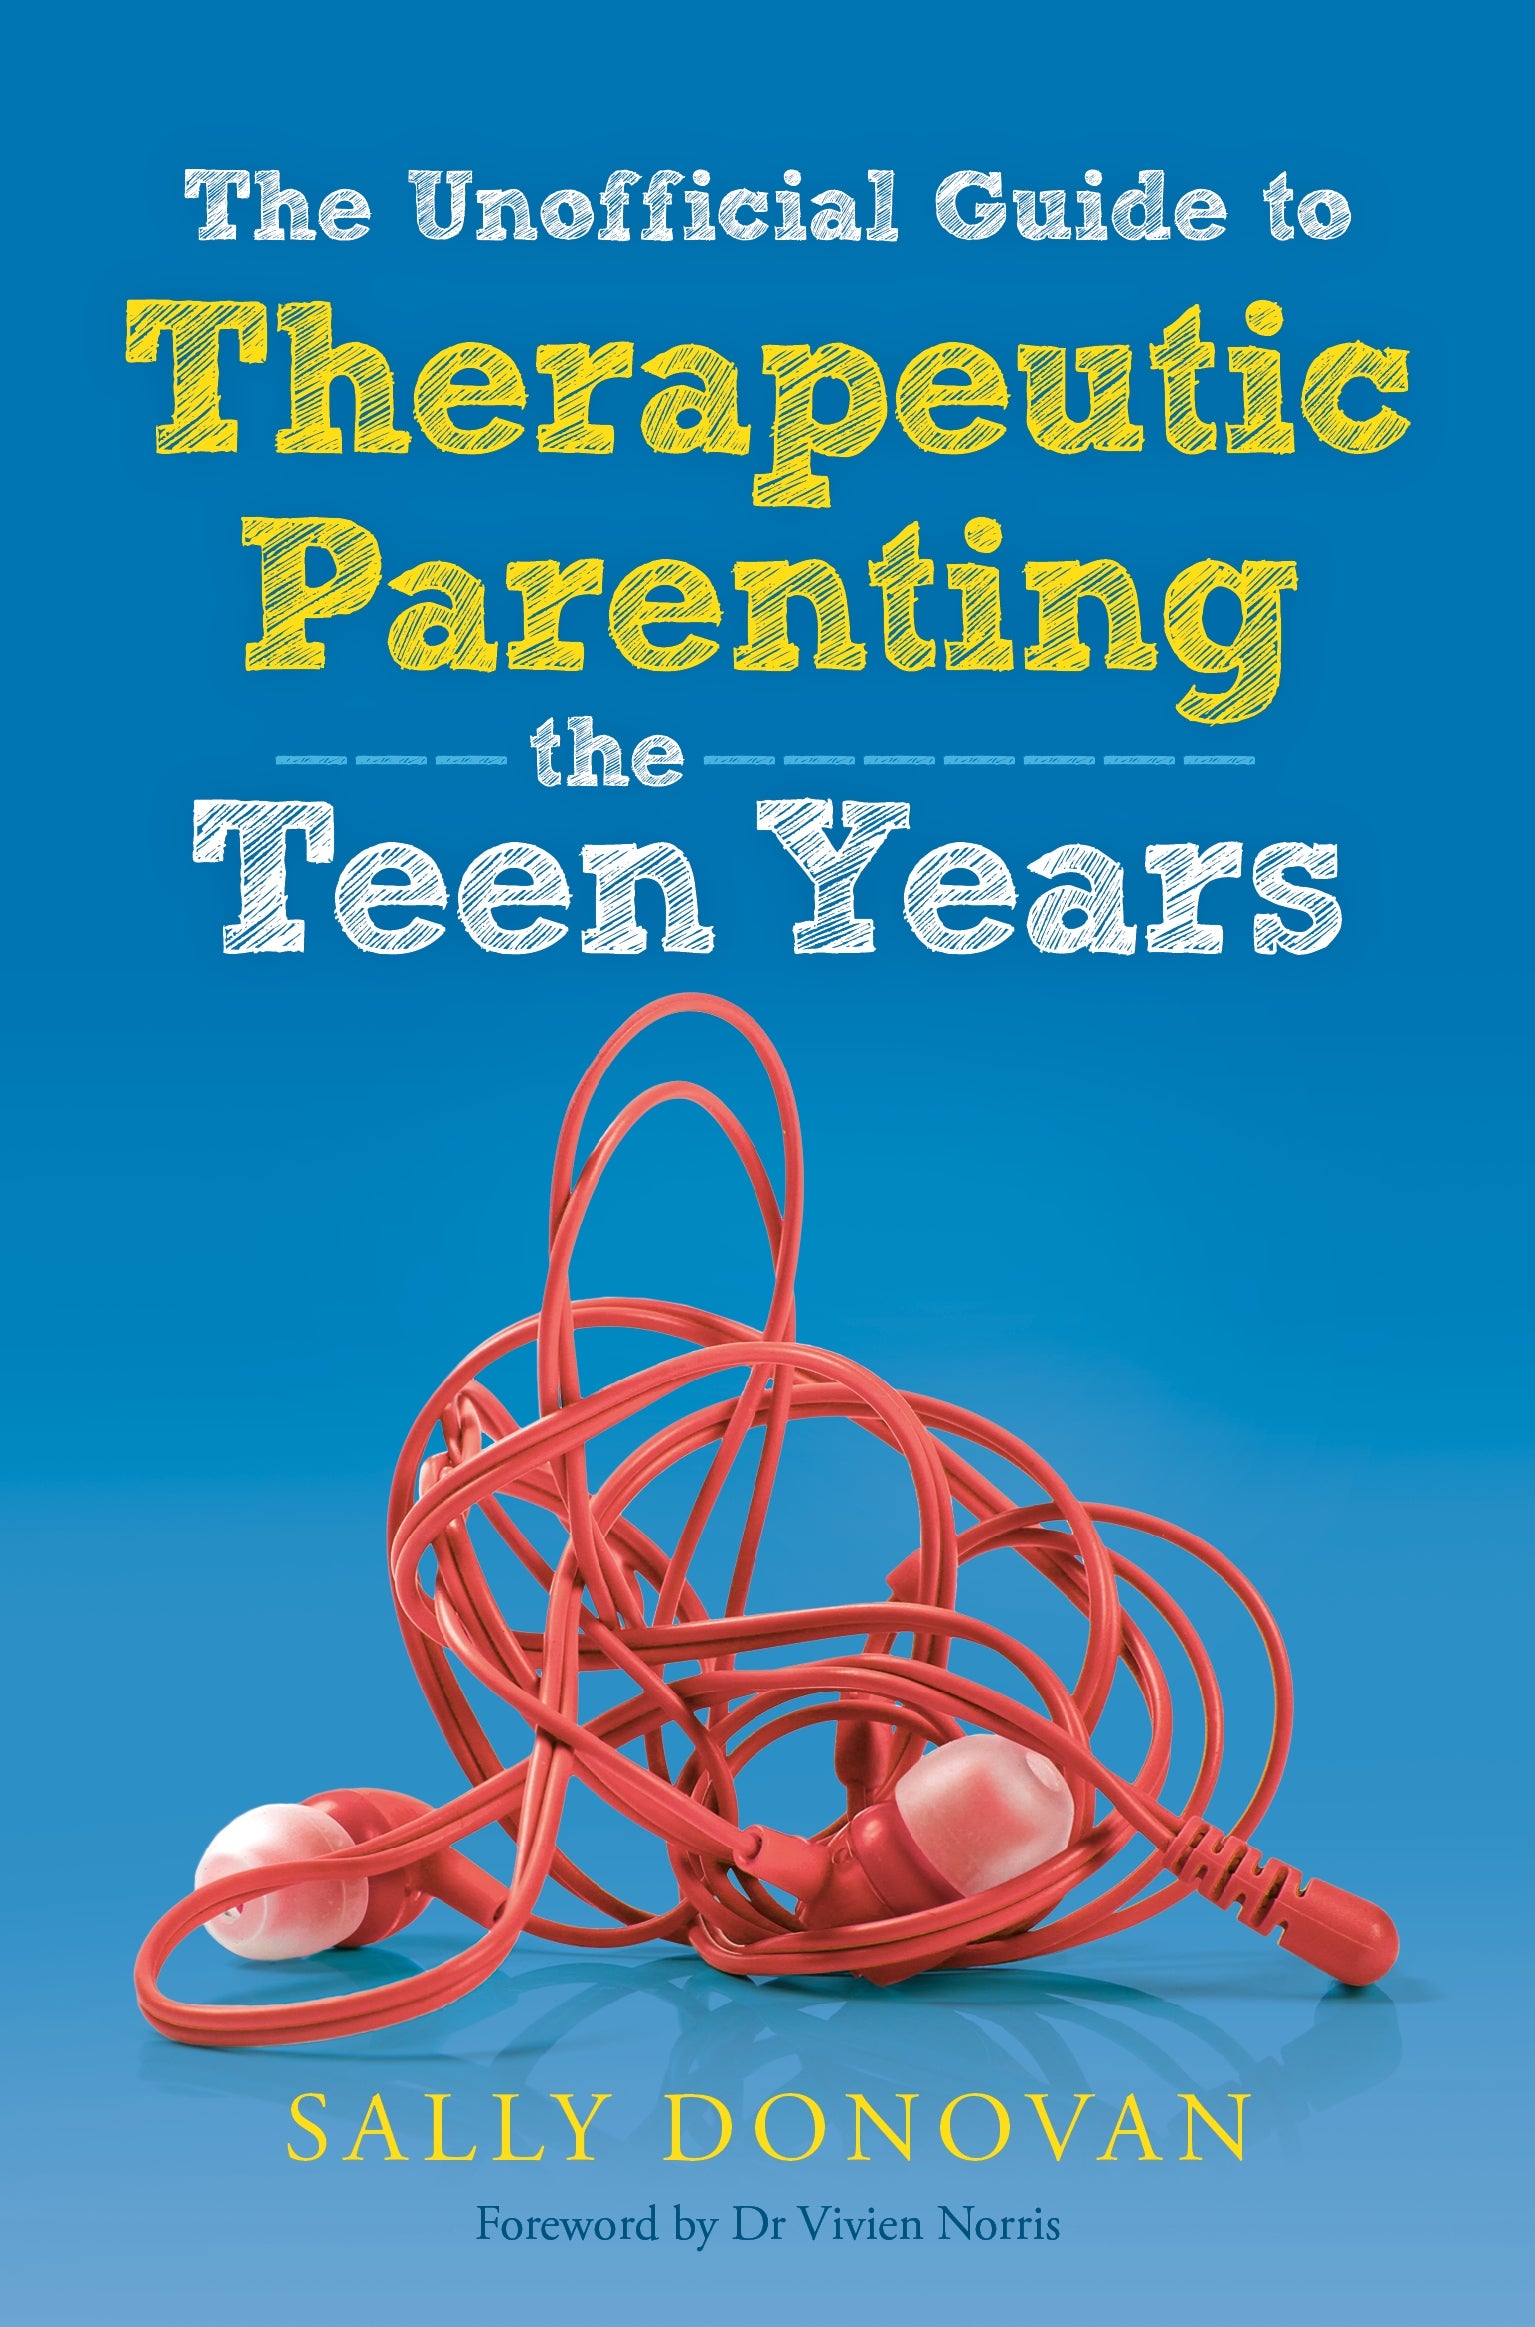 The Unofficial Guide to Therapeutic Parenting - The Teen Years by Sally Donovan